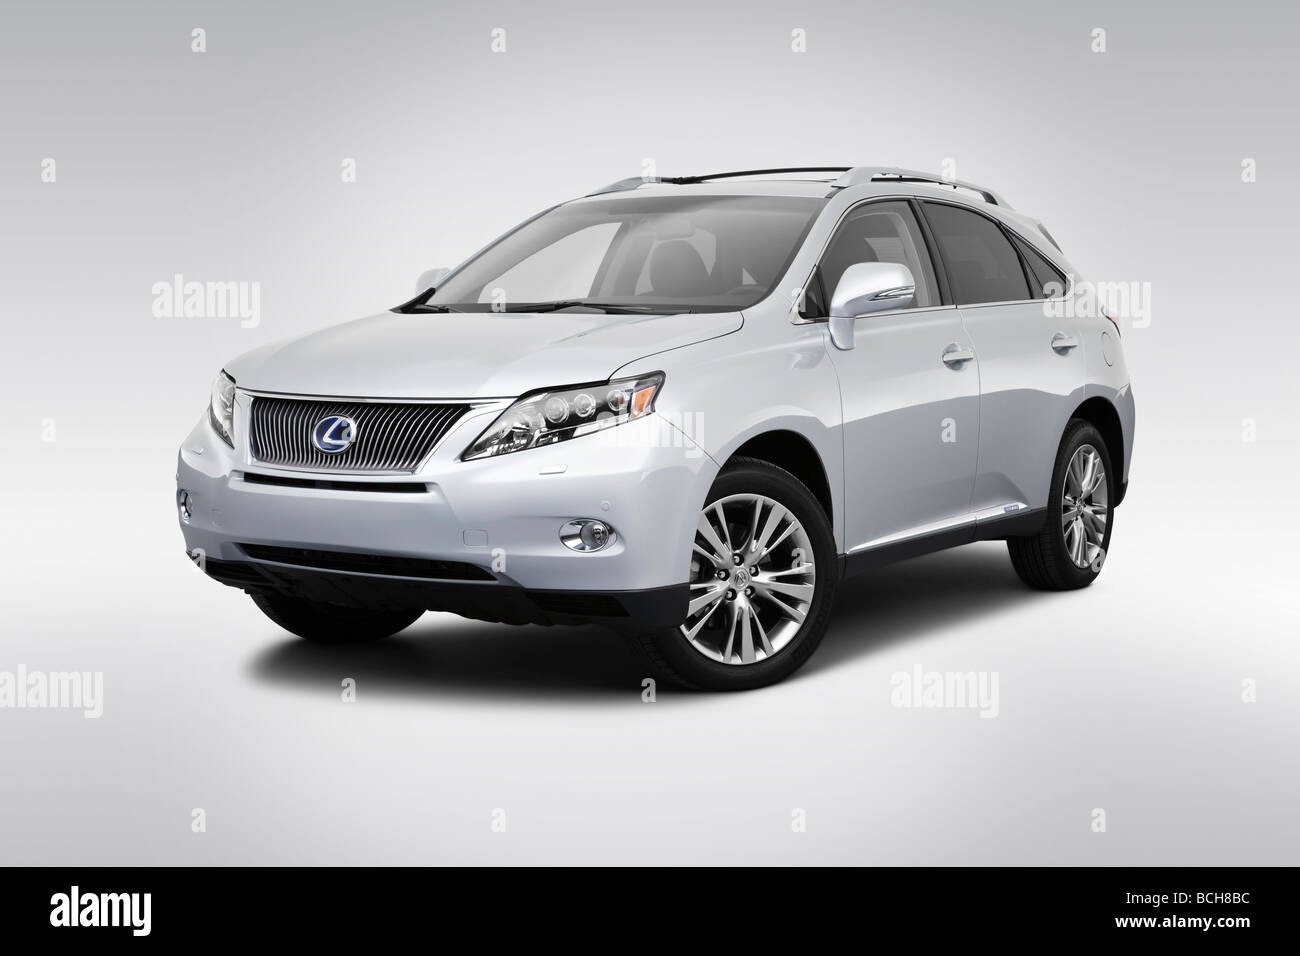 2010 Lexus RX Hybrid RX450h in Gray - Front angle view Stock Photo